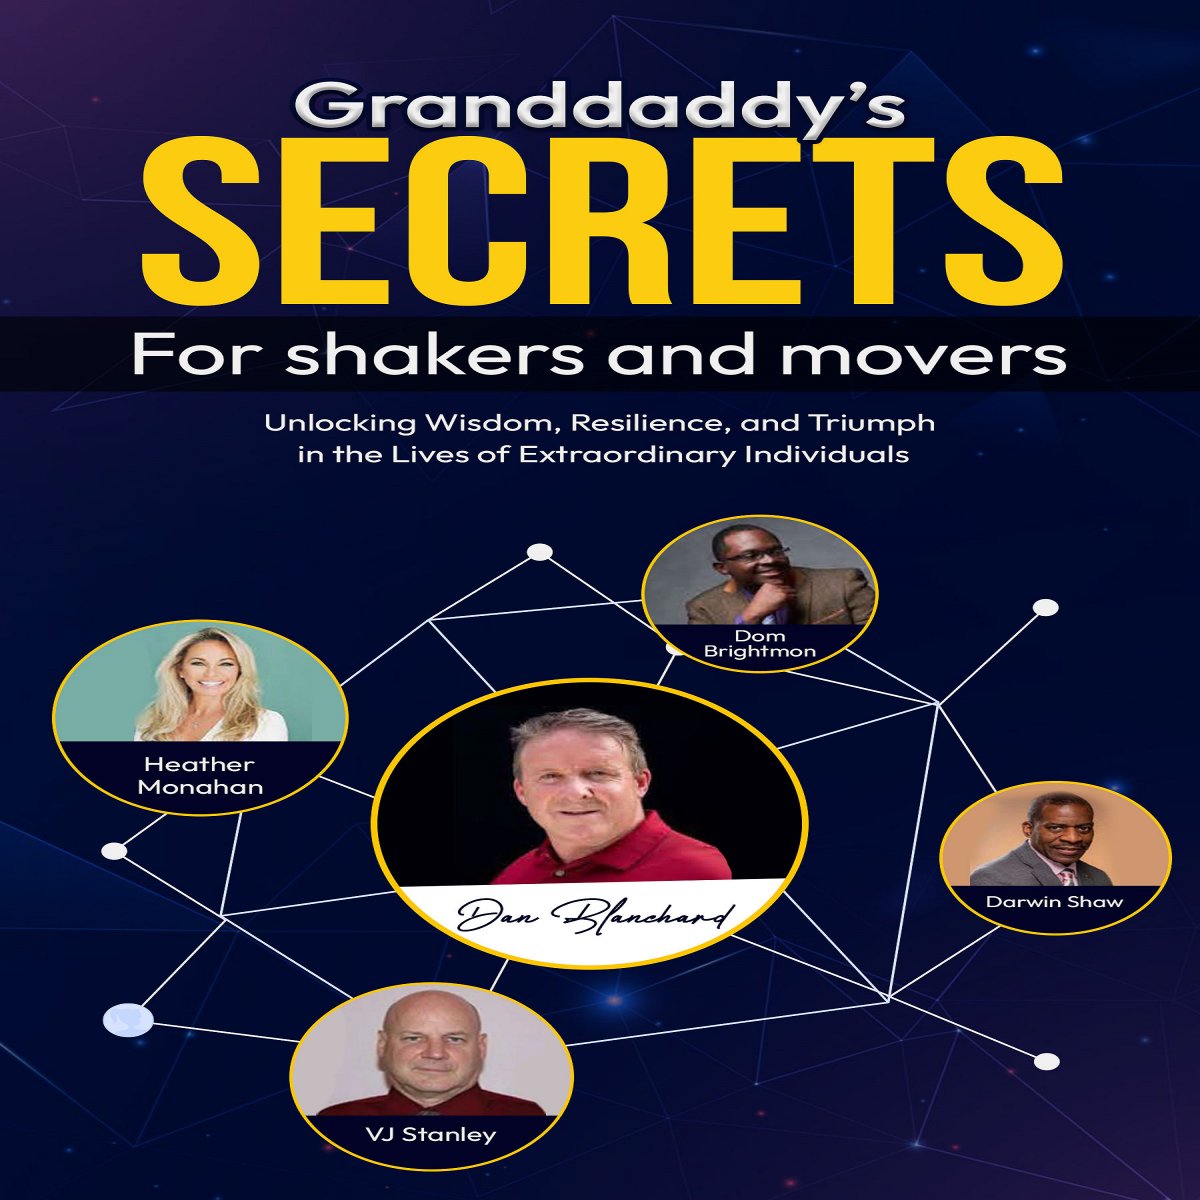 🎧 Exciting News! 📚 Thrilled to share that we've got a fantastic narrator working on the audiobook for 'Granddaddy's Secrets for Shakers and Movers.' 

Stay tuned for an immersive experience! 🚀 

#AudiobookComingSoon #GranddaddysSecrets #NarrationMagic @dan007blanchard